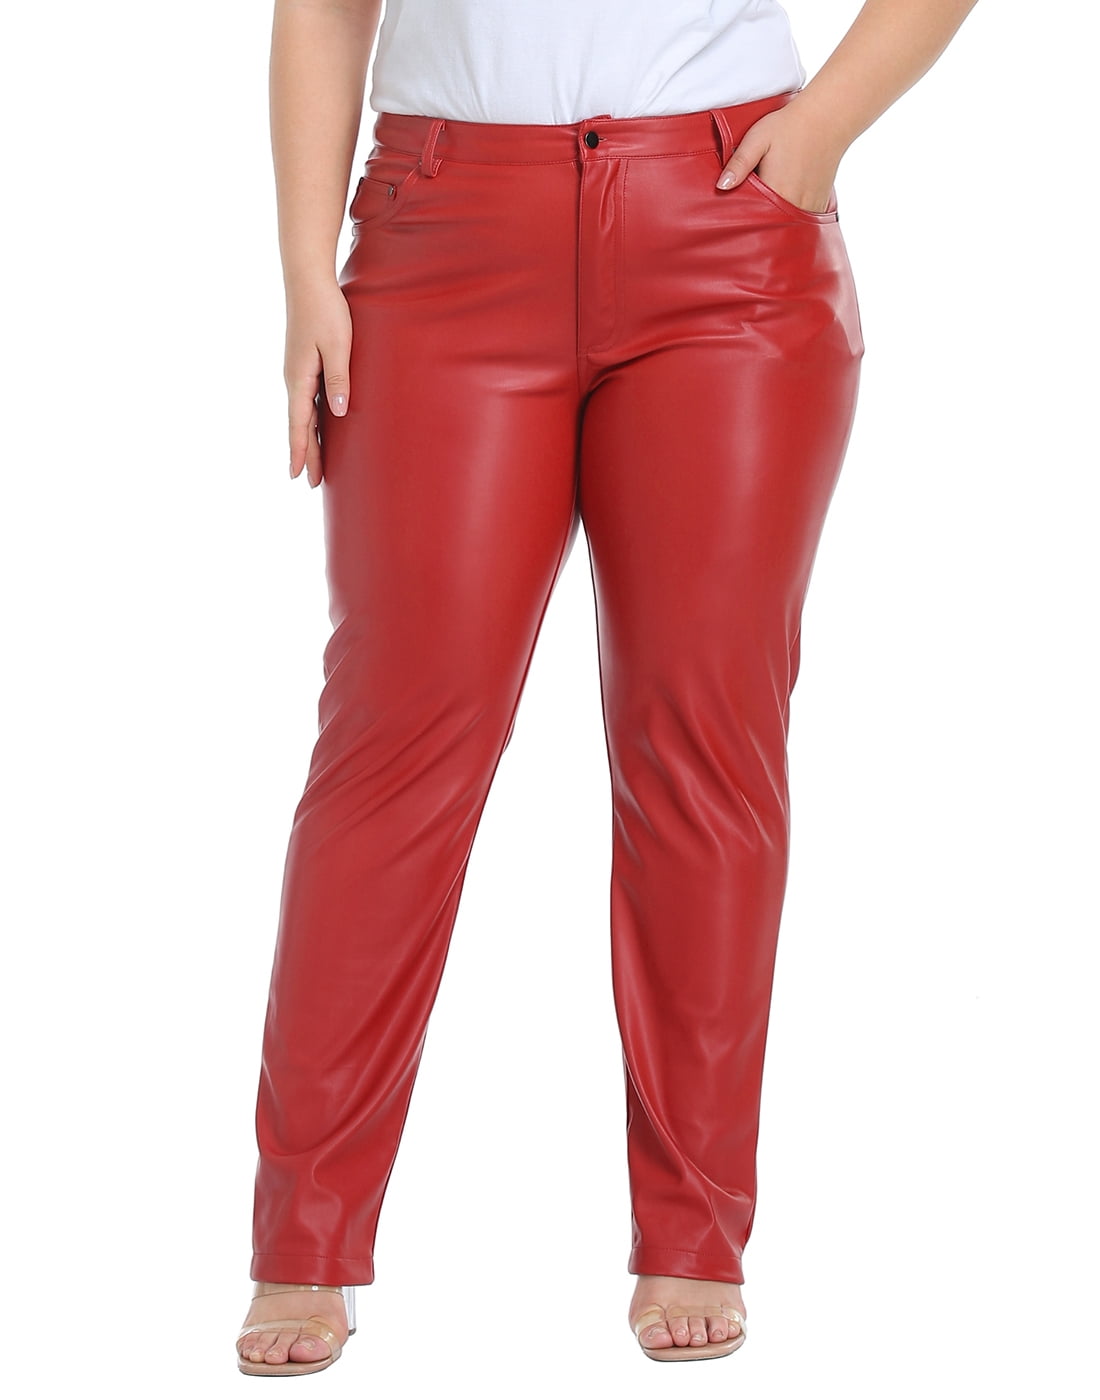 HDE Women's Plus Size High Waisted Faux Leather Pants with Pockets